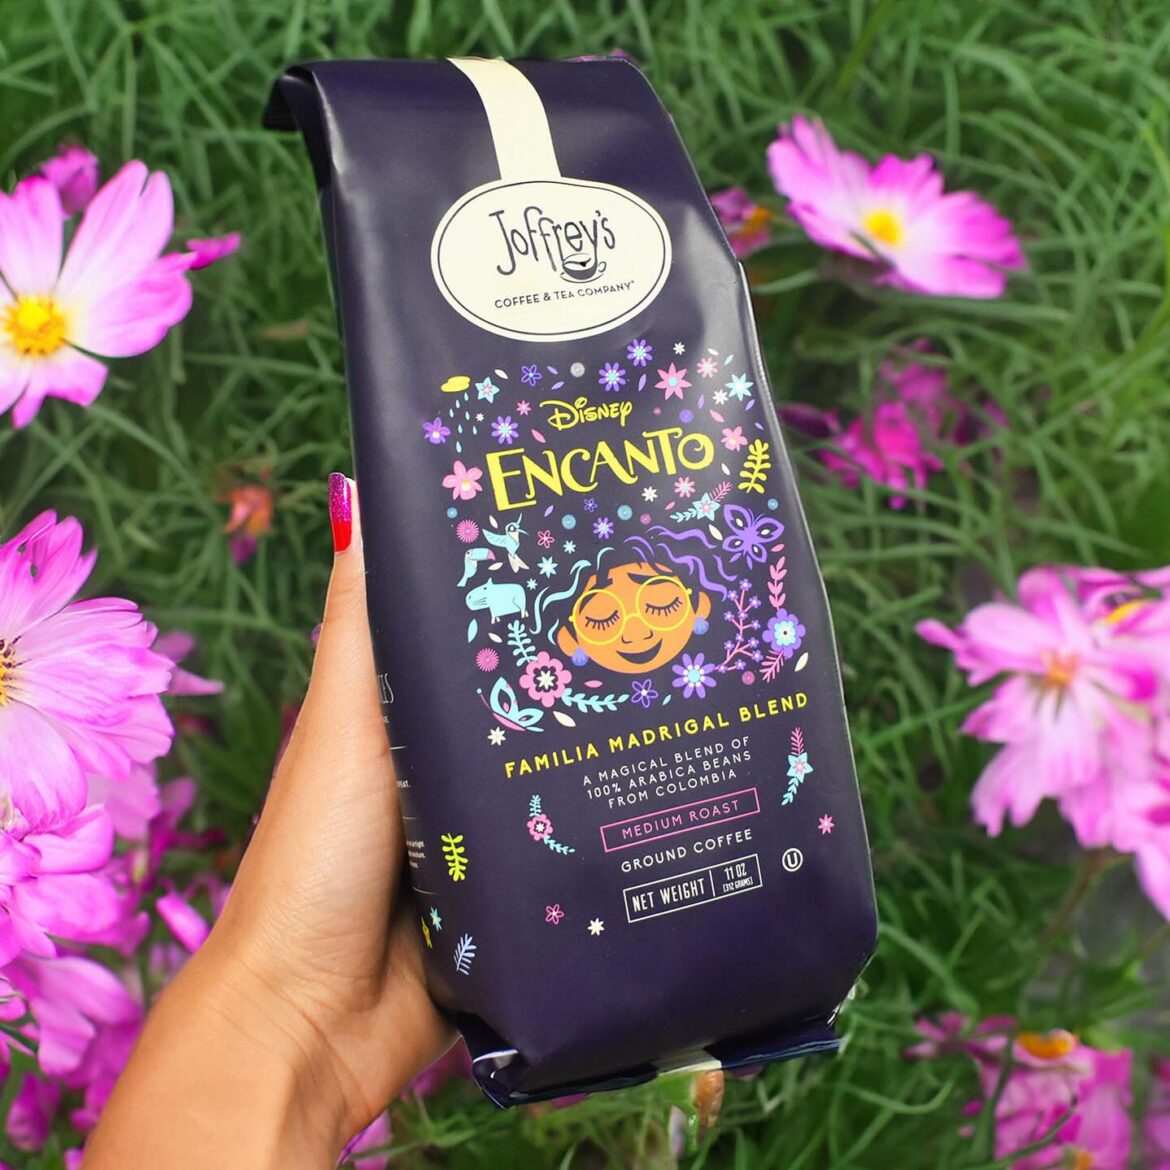 Celebrate Family with Disney Encanto Familia Madrigal Blend from Joffrey’s